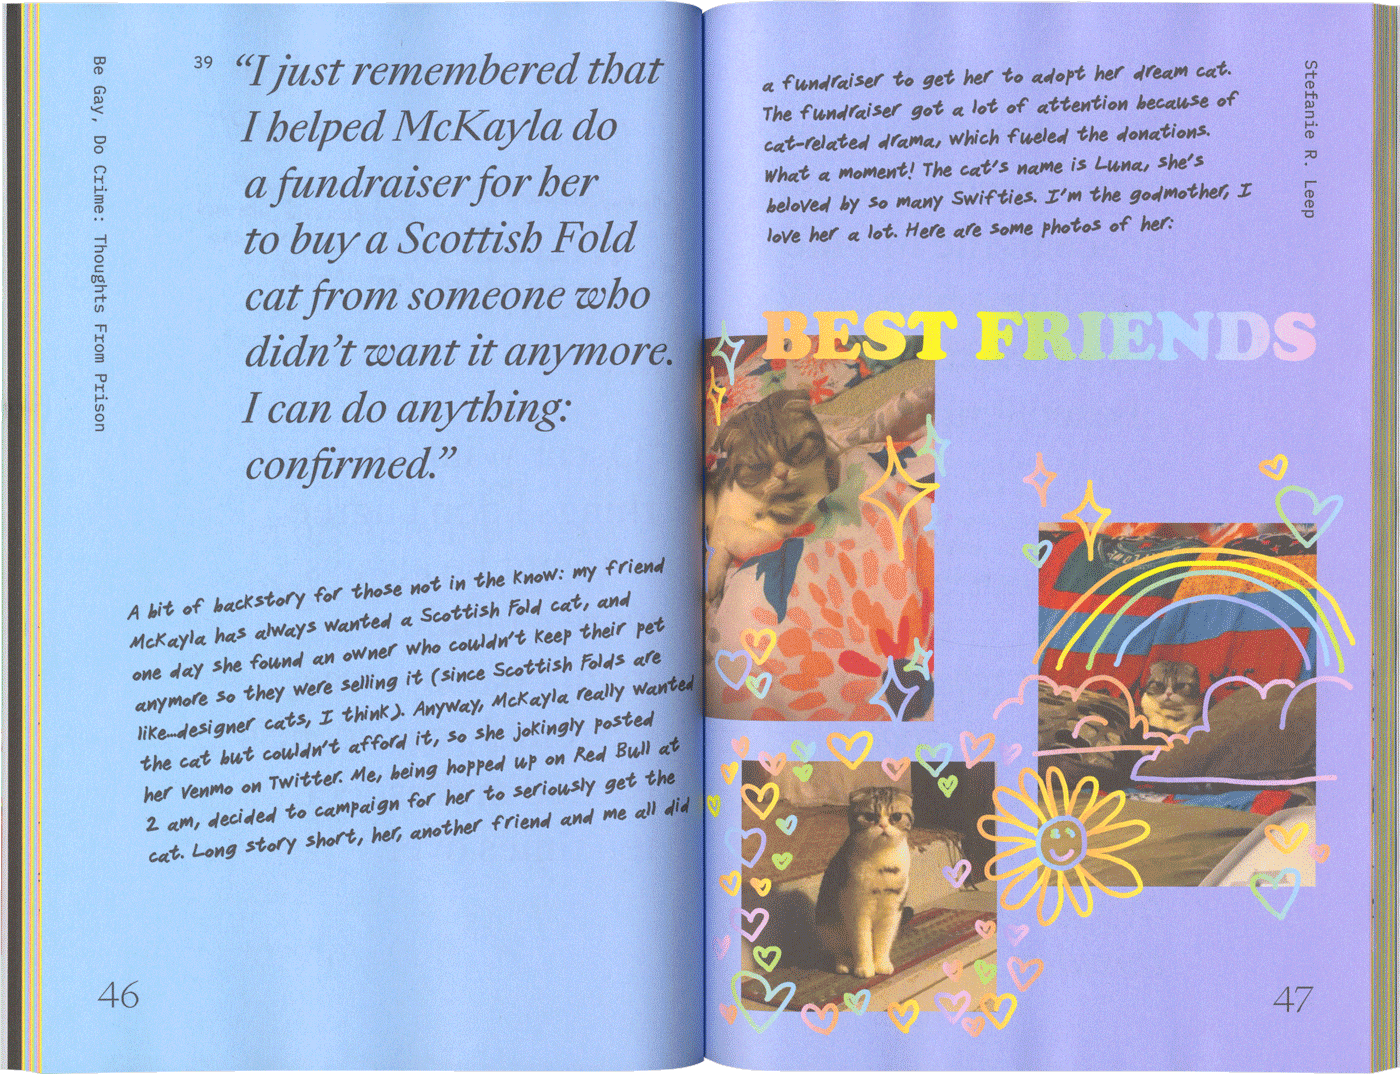 blue and purple spread of a book, three images of a cat with rainbow flowers, hearts, and stars drawn around them